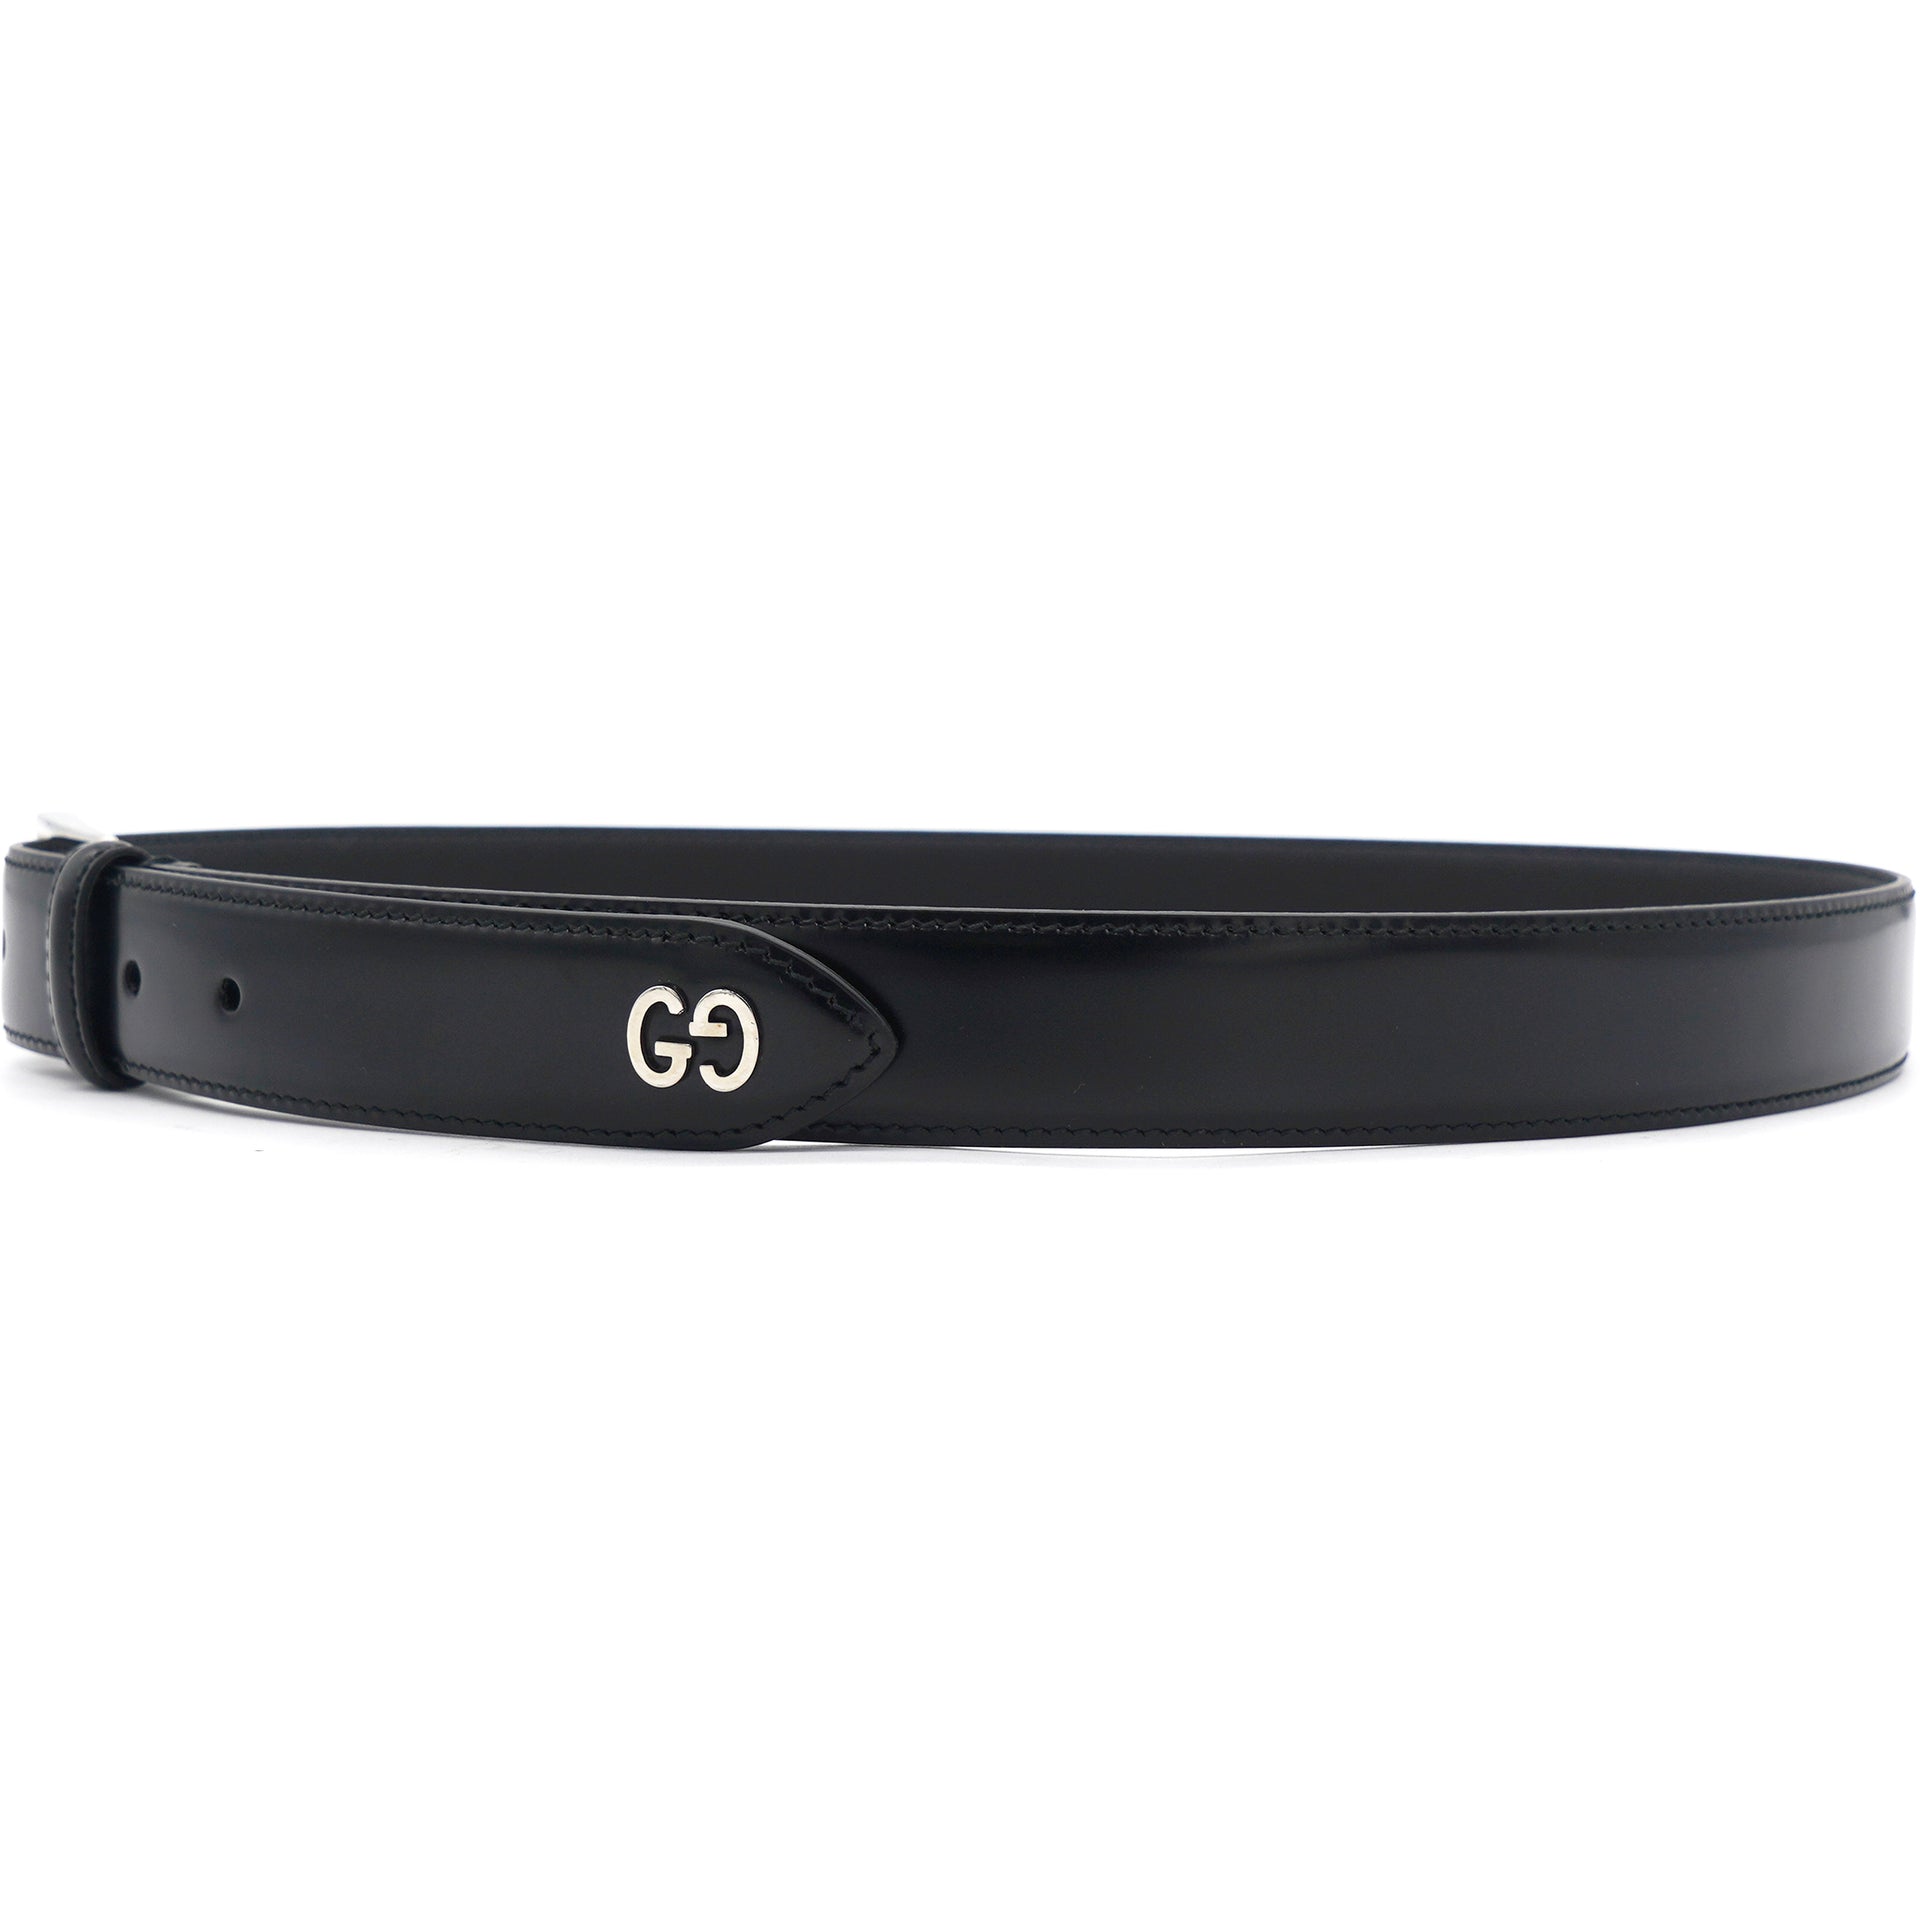 Signature belt with GG detail 90